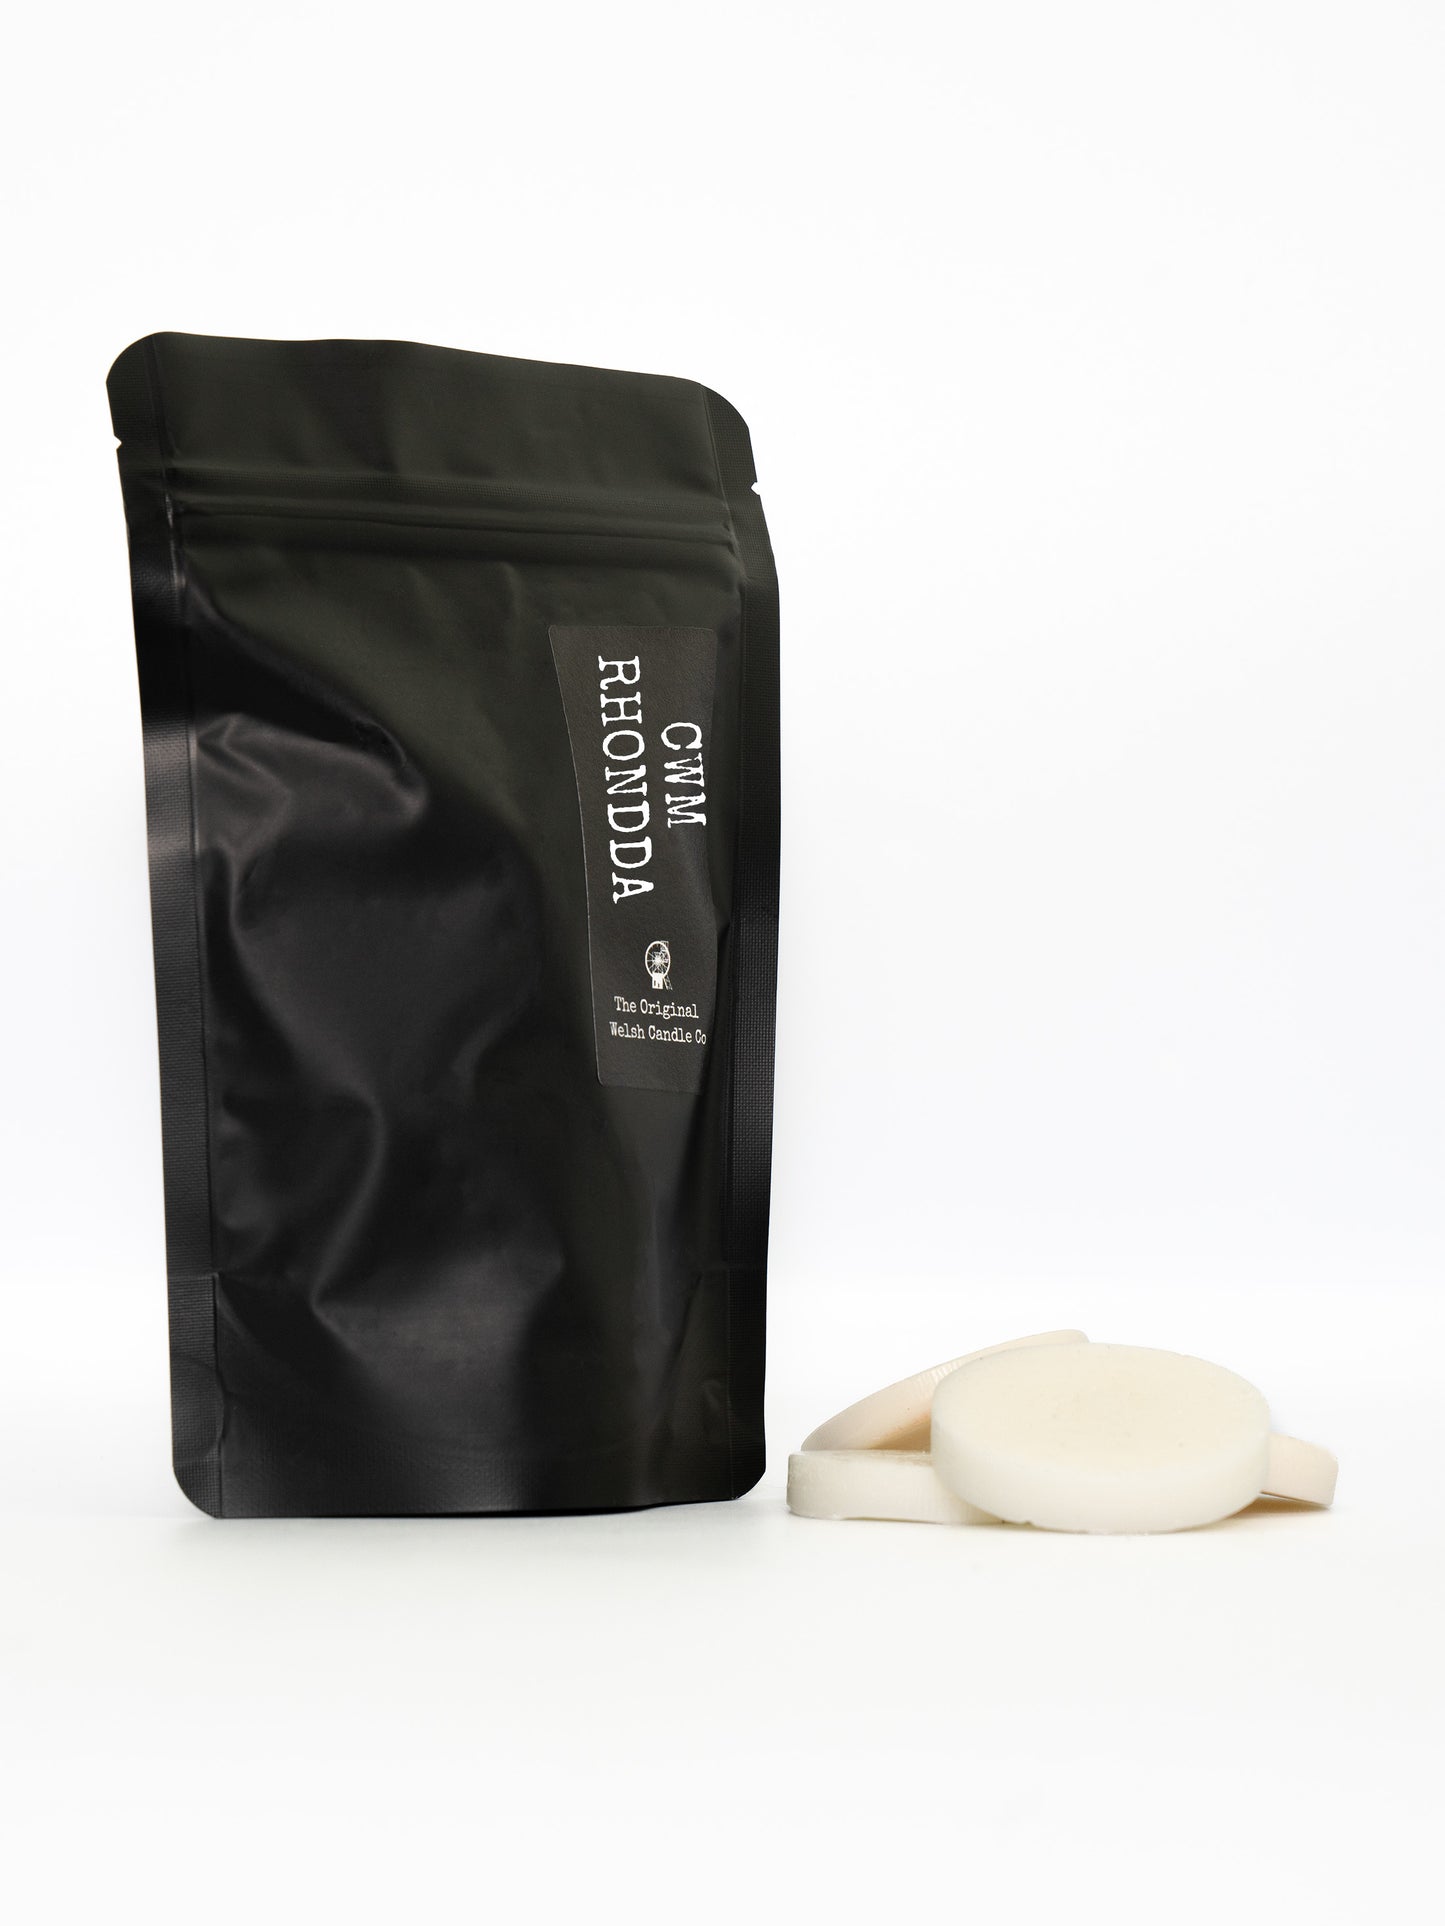 a coffee like pouch containing 6 large wax melts made with soy wax labelled with a cwm rhondda sticker